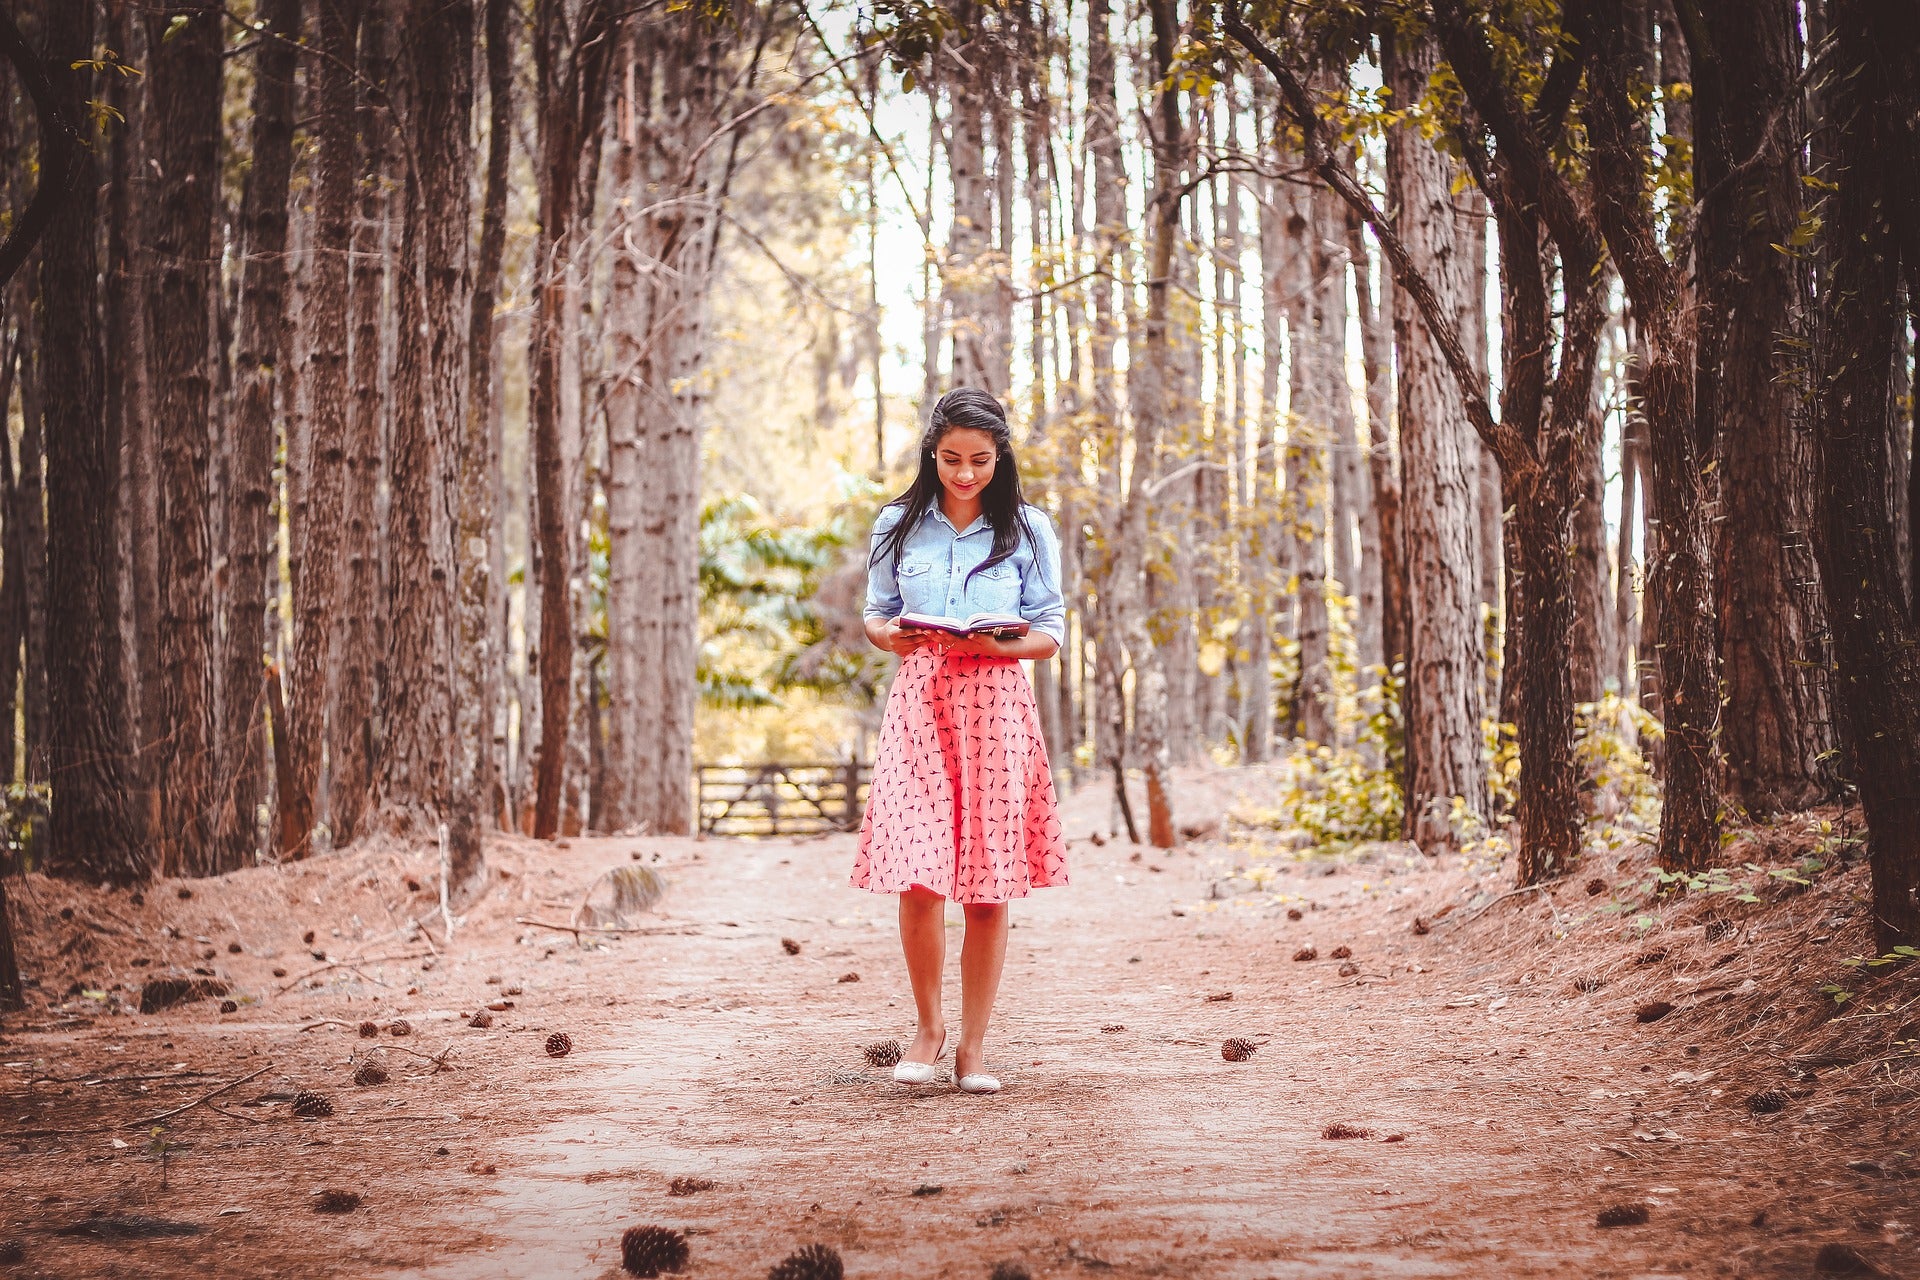 Girl walking in forest holding book